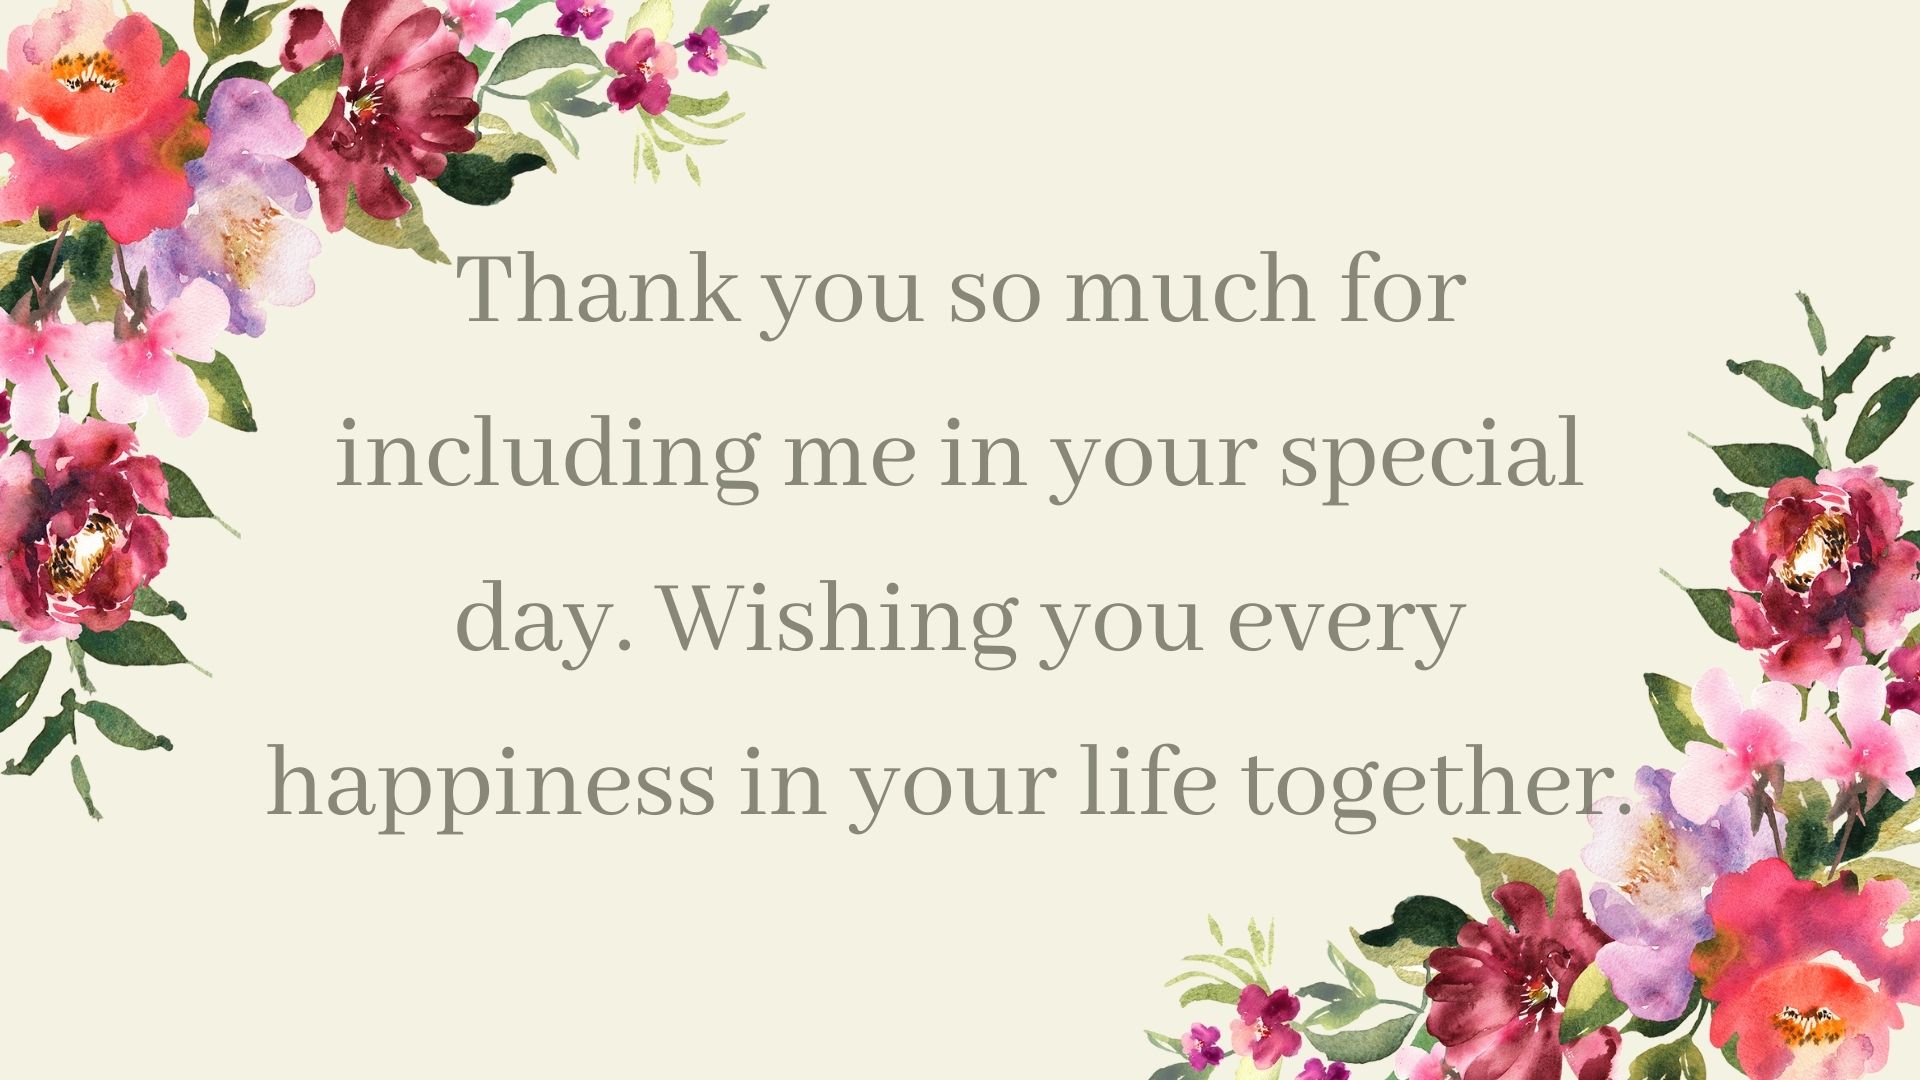 What to write in a wedding card: 32 congratulations messages | Woman & Home